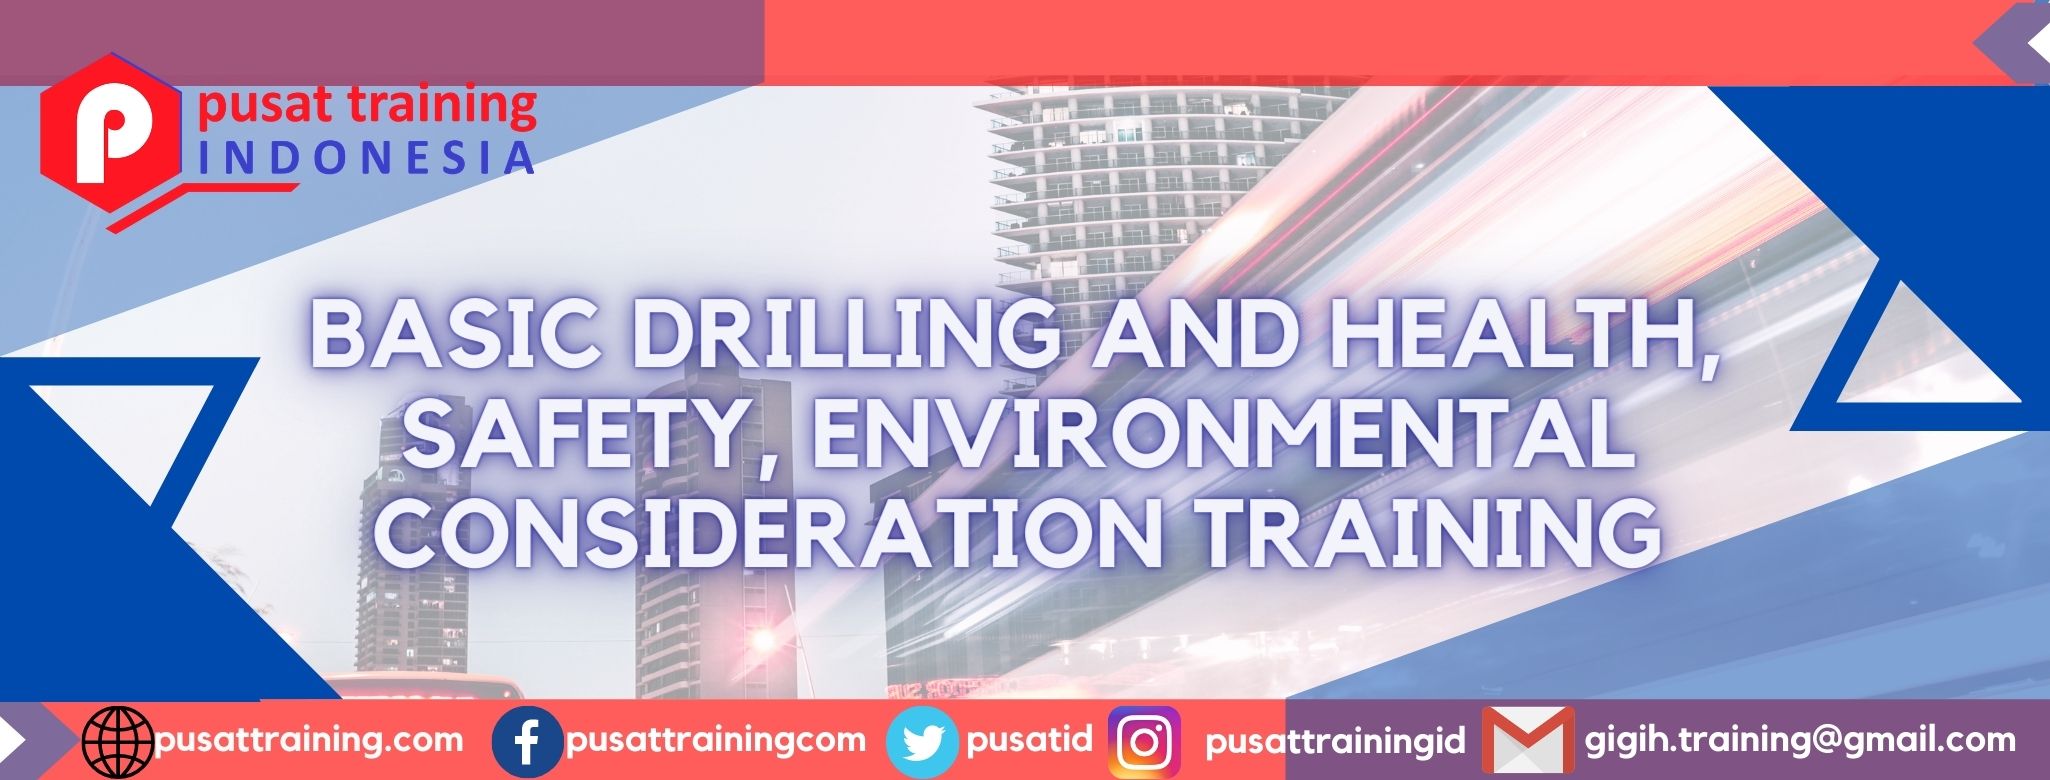 BASIC DRILLING AND HEALTH, SAFETY, ENVIRONMENTAL CONSIDERATION TRAINING